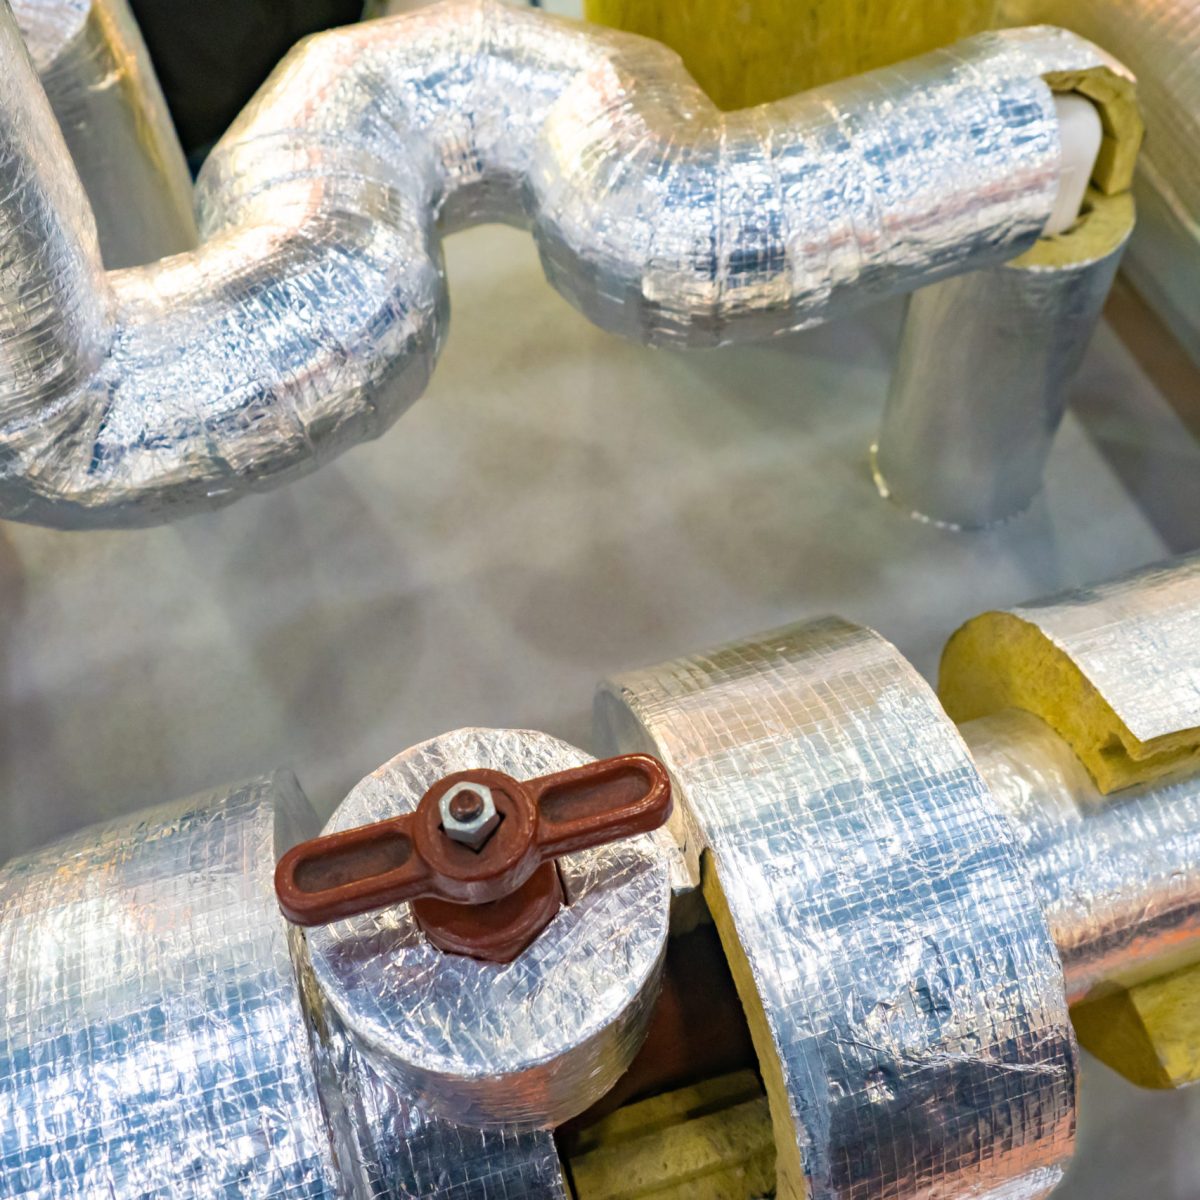 Pipes with a layer of insulating material and foil. Pipes with brown valve. Foil insulation for pipes. Demonstration of thermal insulation properties of insulation with foil.